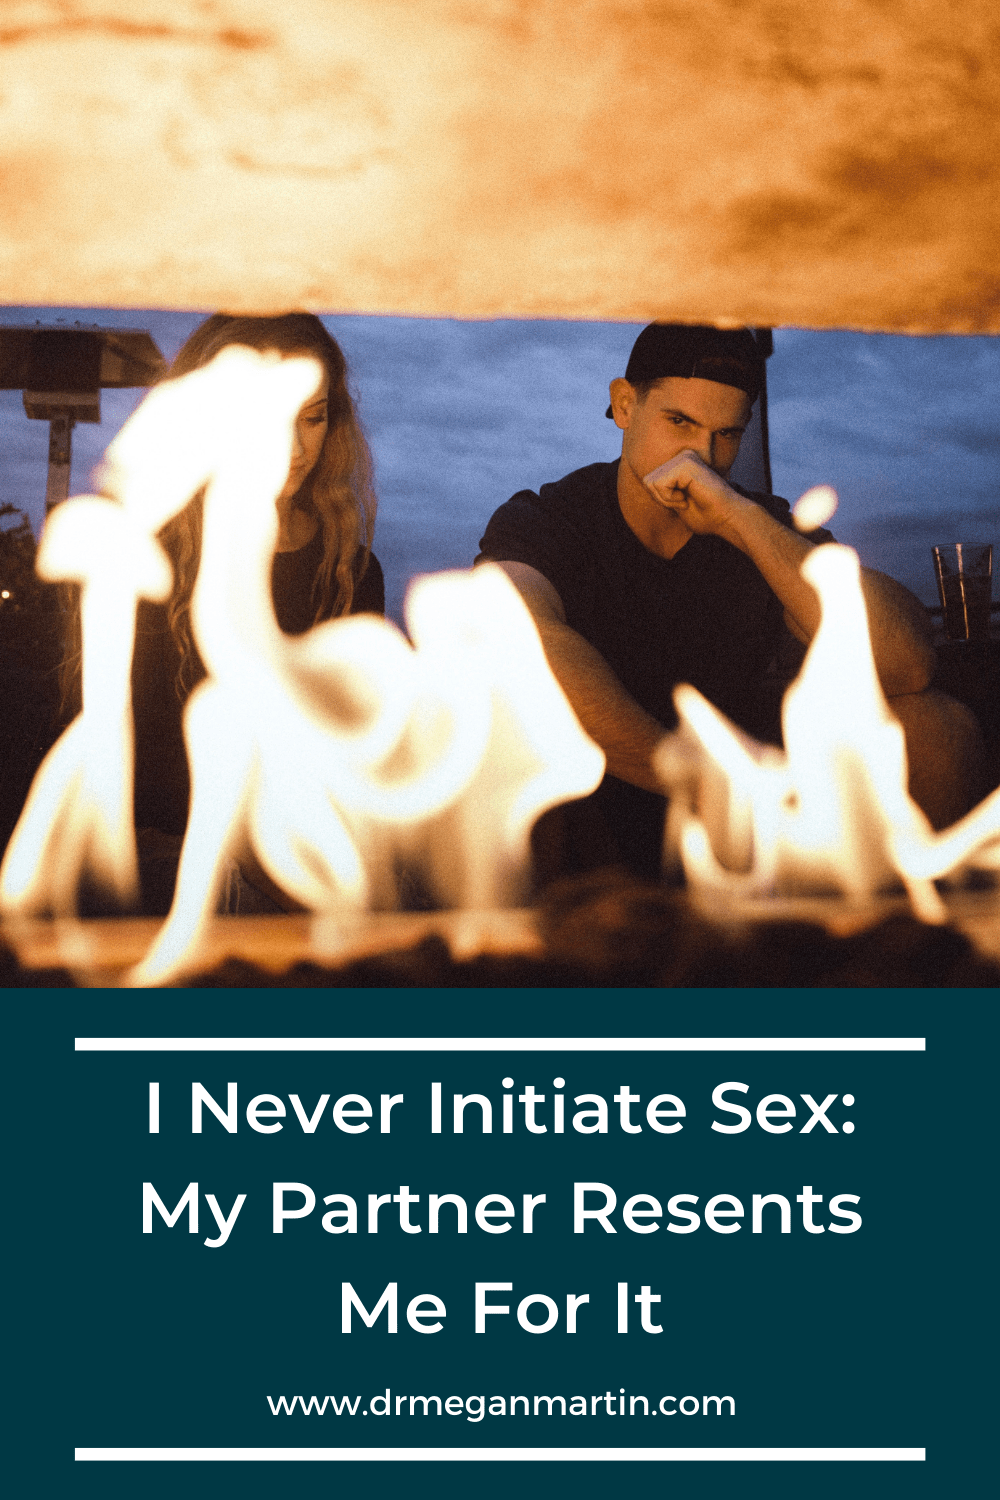 I never initiate sex and my partner resents me for it